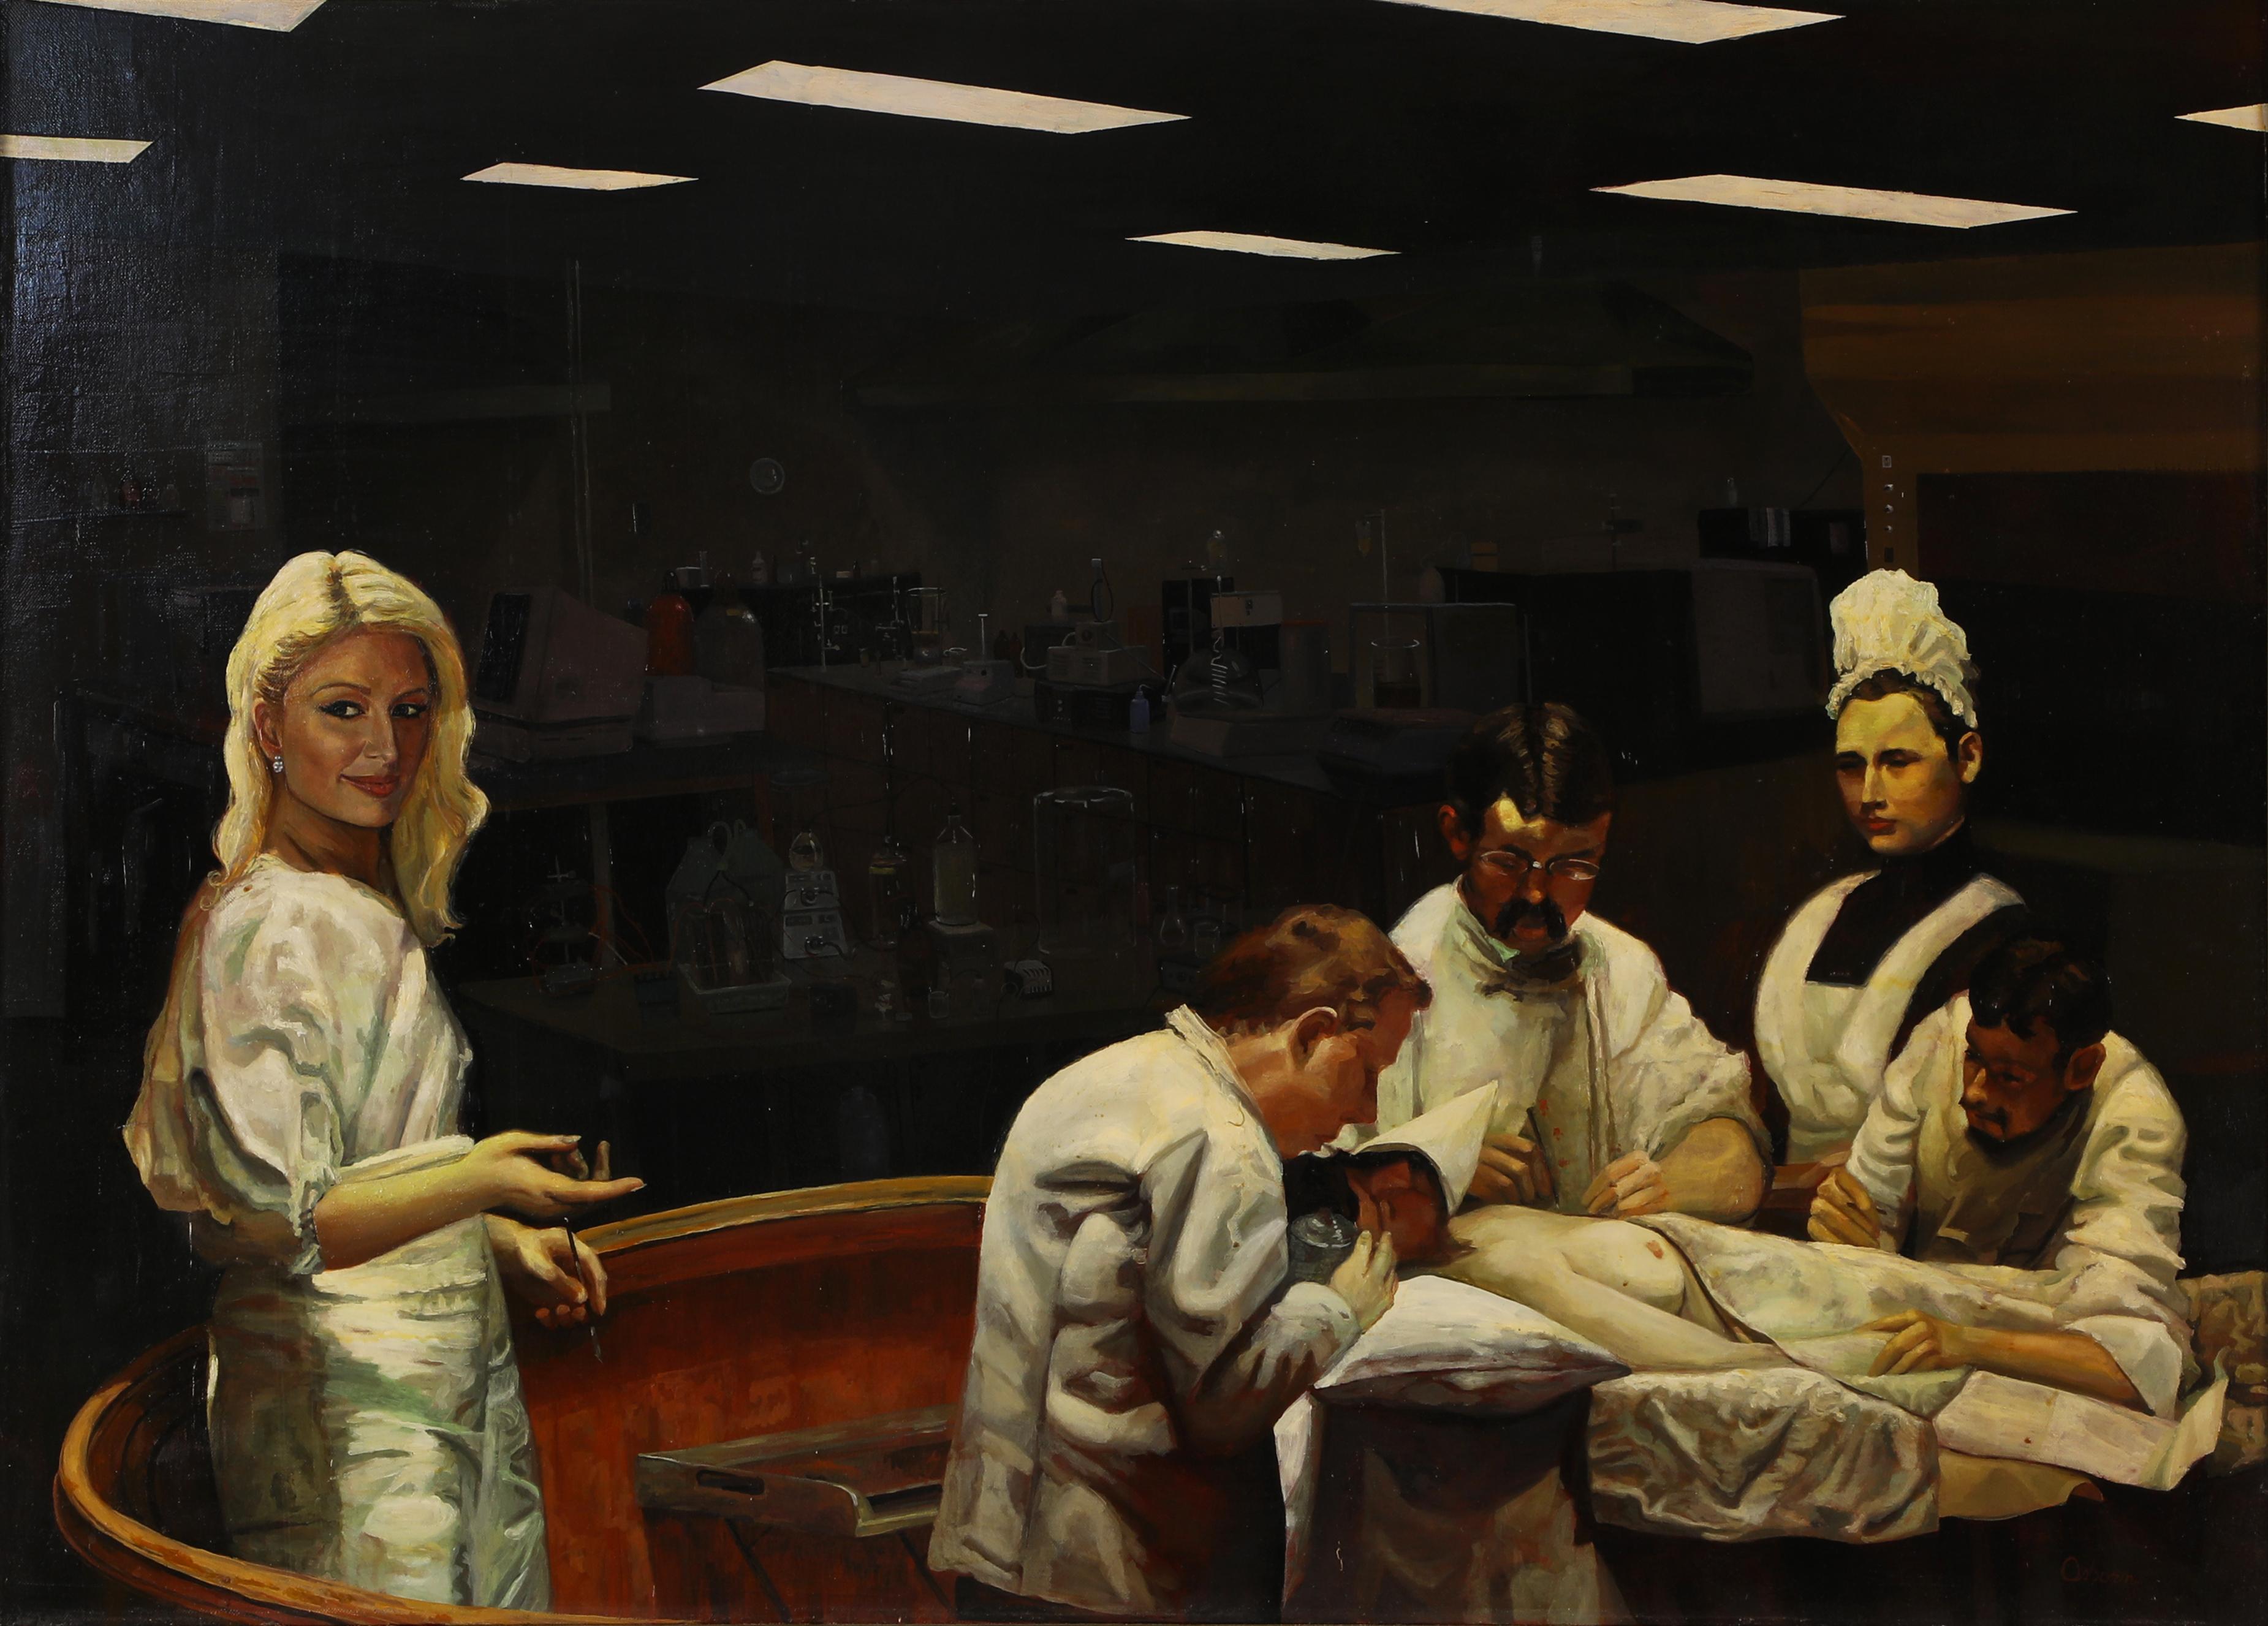 Brett Osborn Figurative Painting - Hilton Curing Cancer at the Centers for Disease Control (CDC)